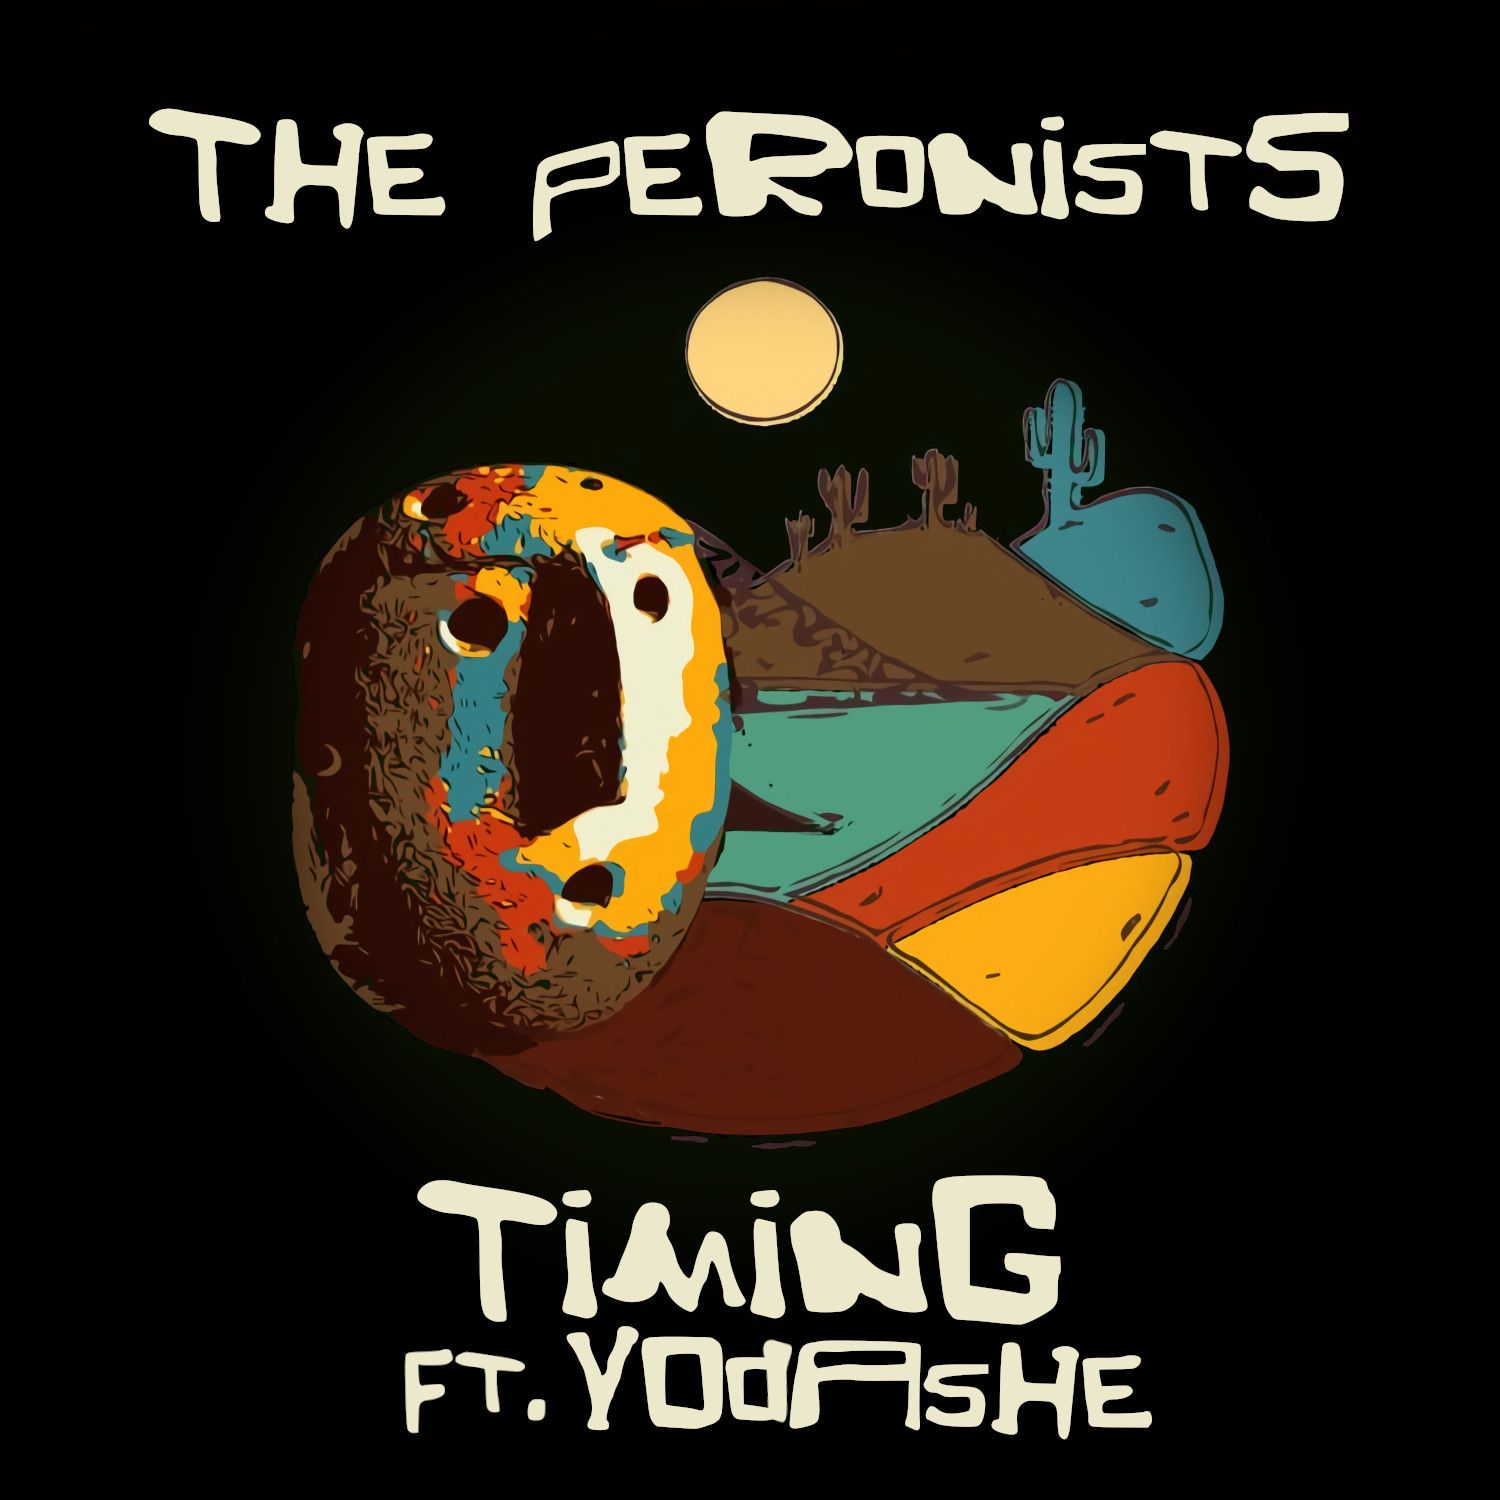 Timing (Vocal mix) ft. Yodashe